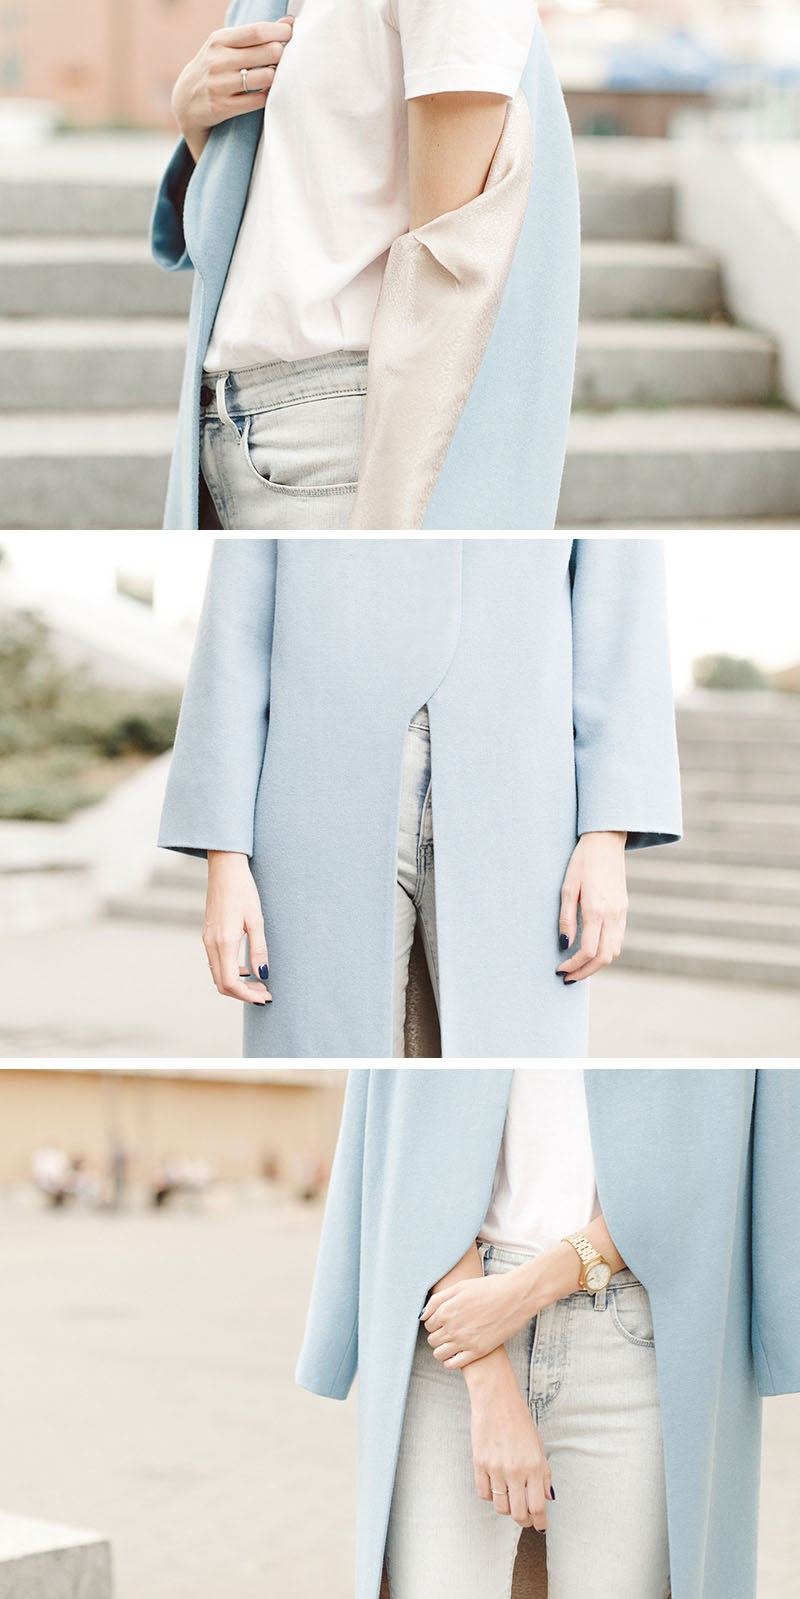 This light pastel blue minimalist womens spring coat, made from wool and a viscose lining, adds a soft touch of color to any outfit and keeps you warm on cooler days.